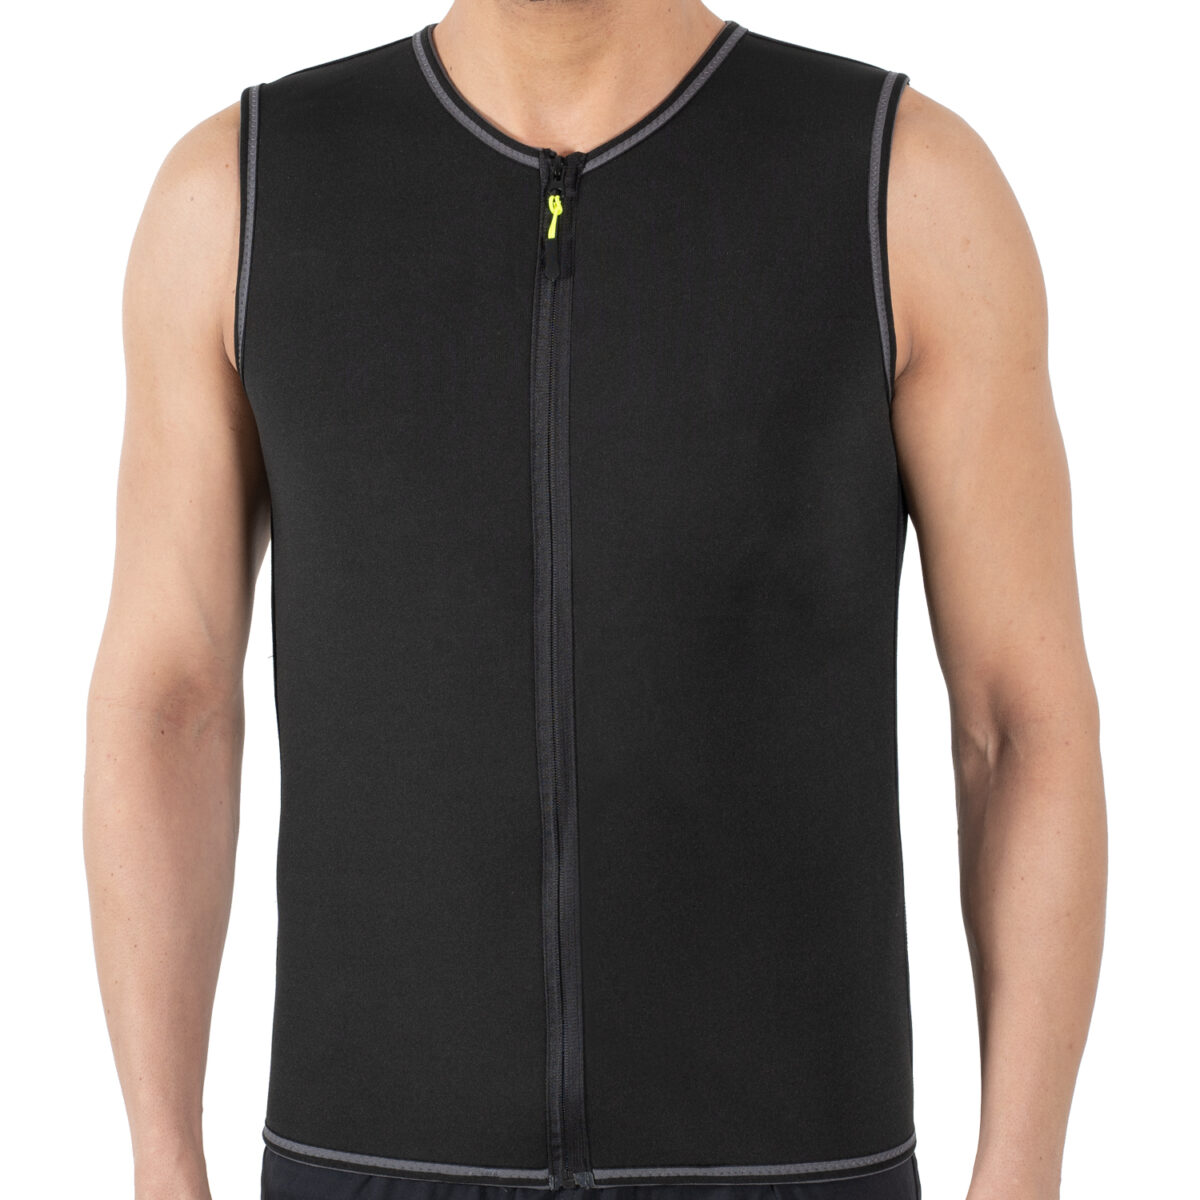 wingmed produits orthopédiques Gilet Thermique W 461 74